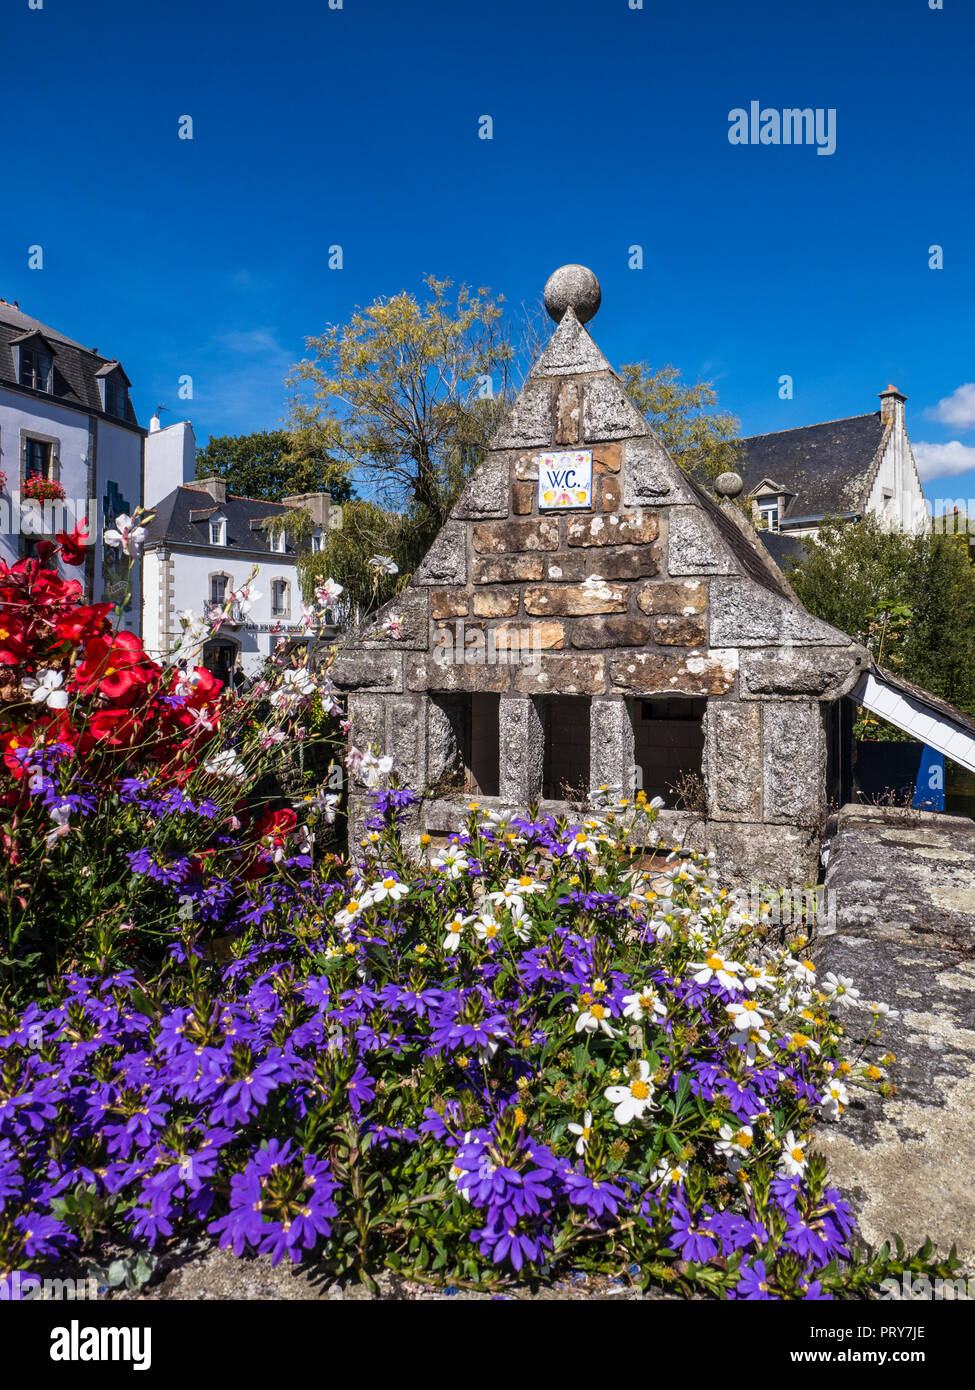 Pont Aven Historic quirky notable small stone WC lavatory toilet building on the banks of the River Aven in Pont-Aven Brittany France Stock Photo